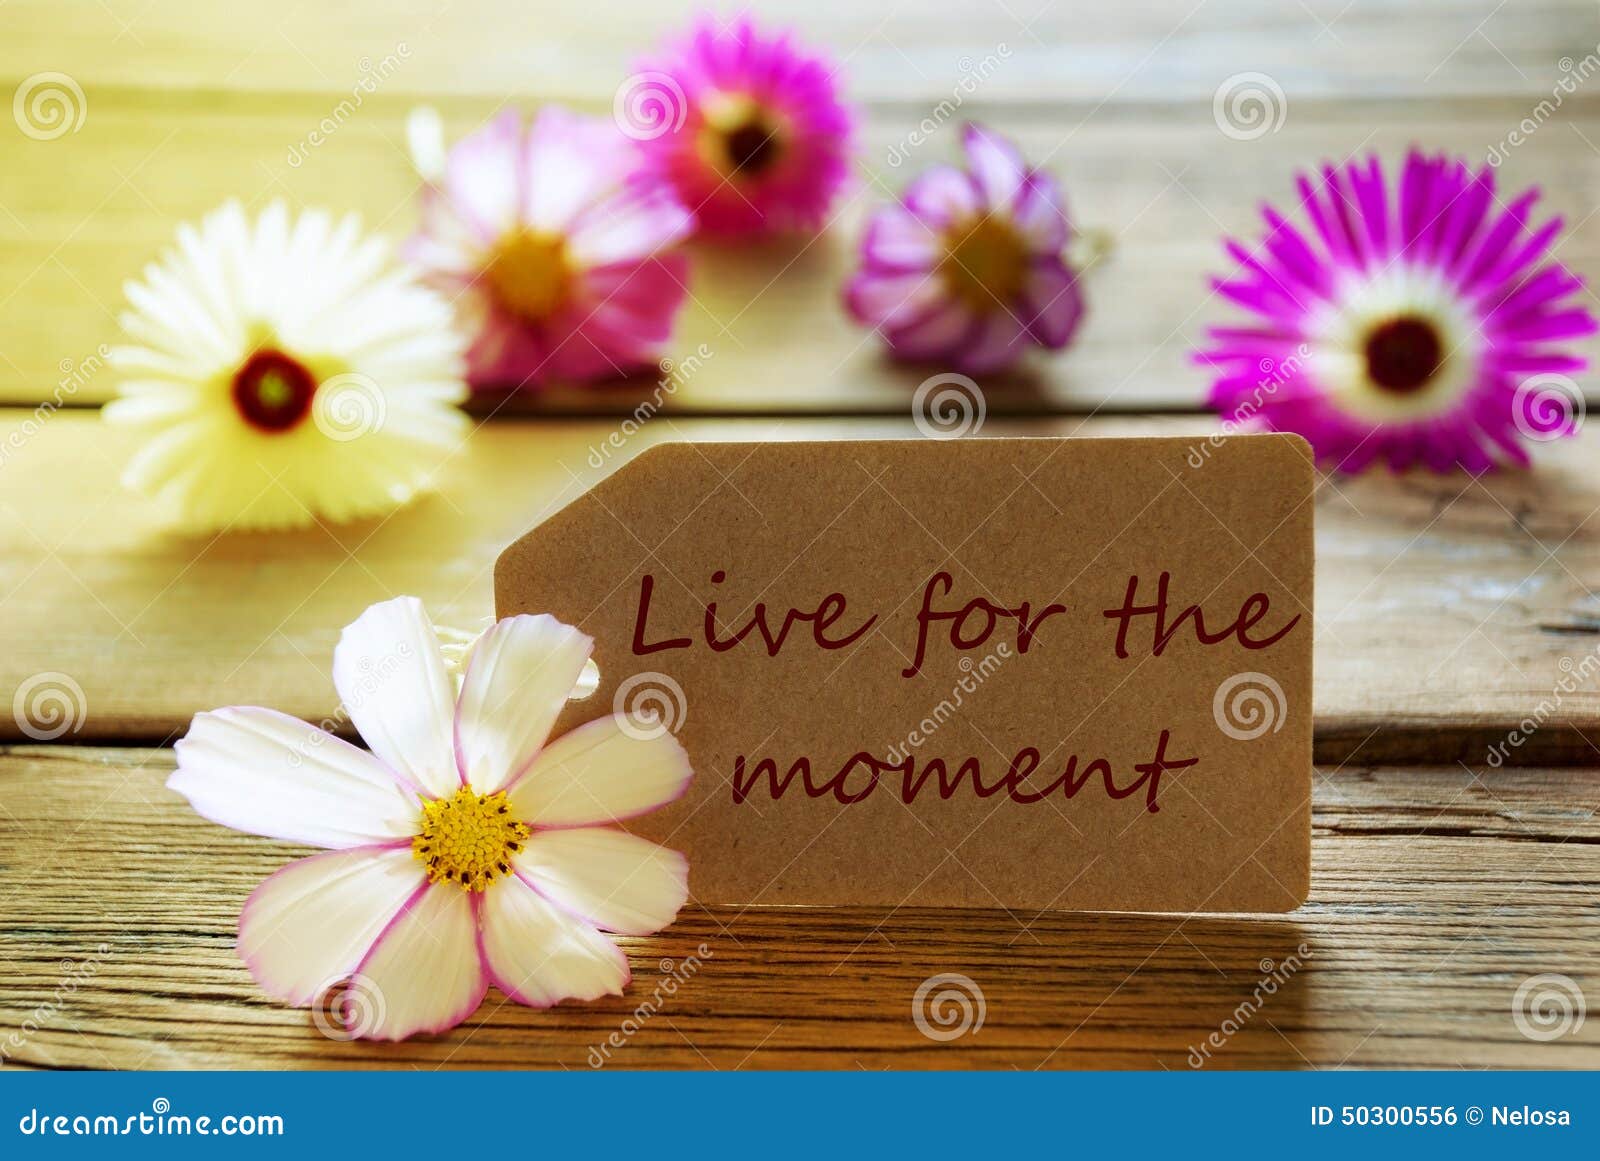 sunny label life quote live for the moment with cosmea blossoms